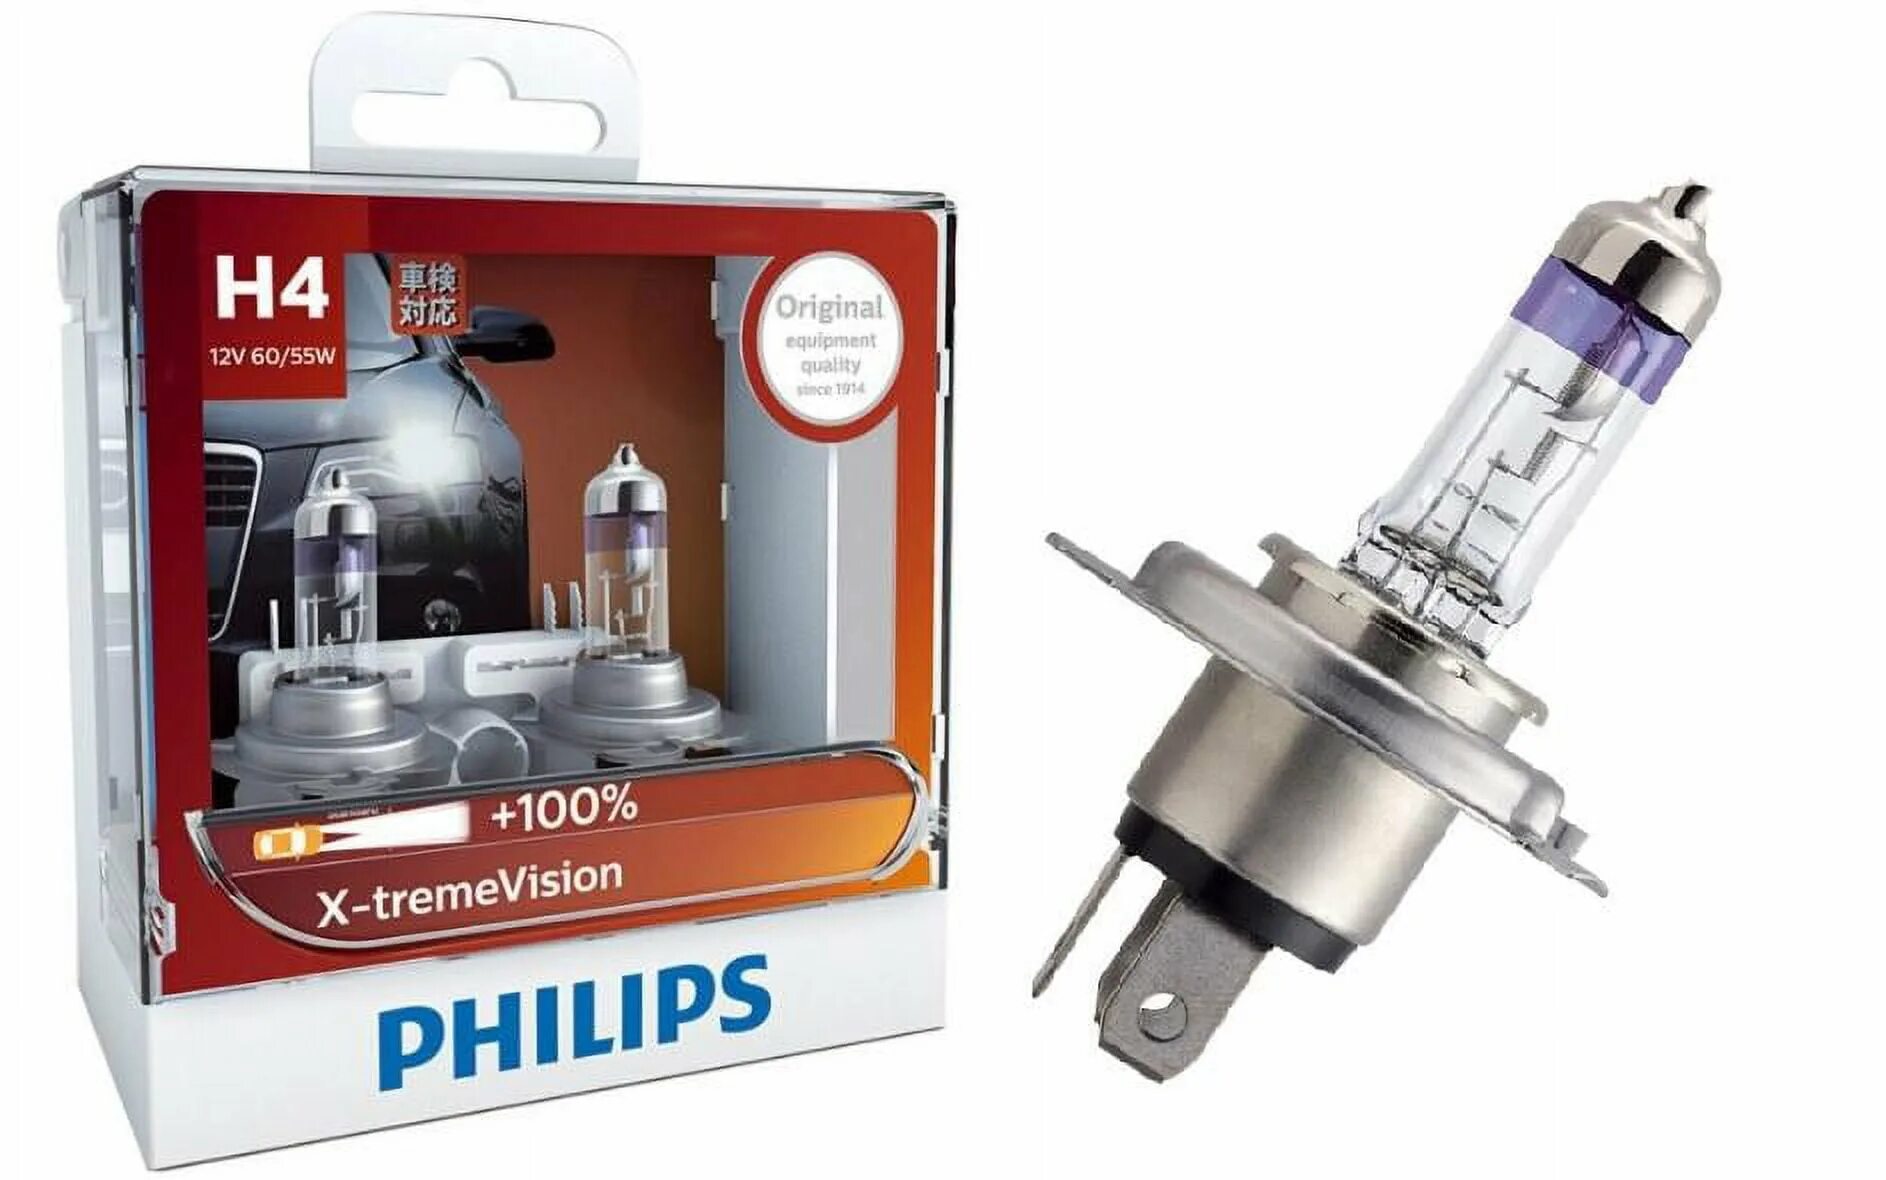 Philips h4 12342 12v 60/55w. Philips h-4 12v 60/55w Standard 12342 prс1. Филипс 12342 h4. Лампа Philips h4 12v60/55w p43t +200% Racing Vision gt200.